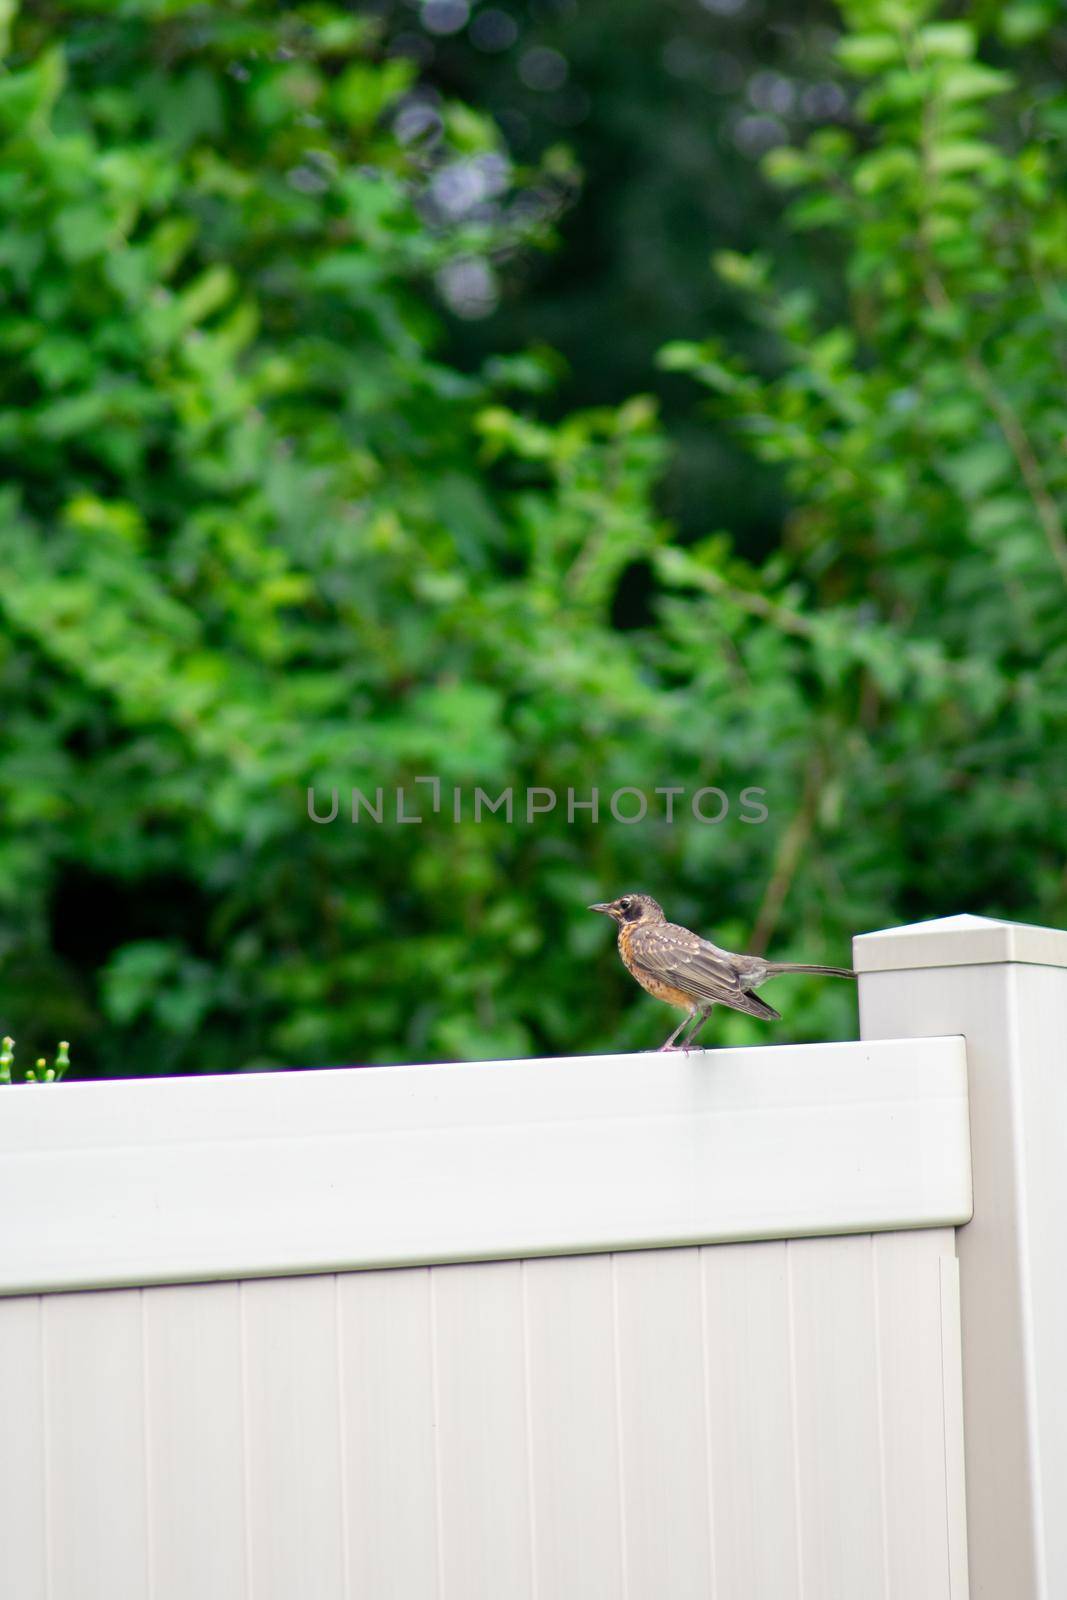 An American Robin on a Fence in Pennsylvania by bju12290